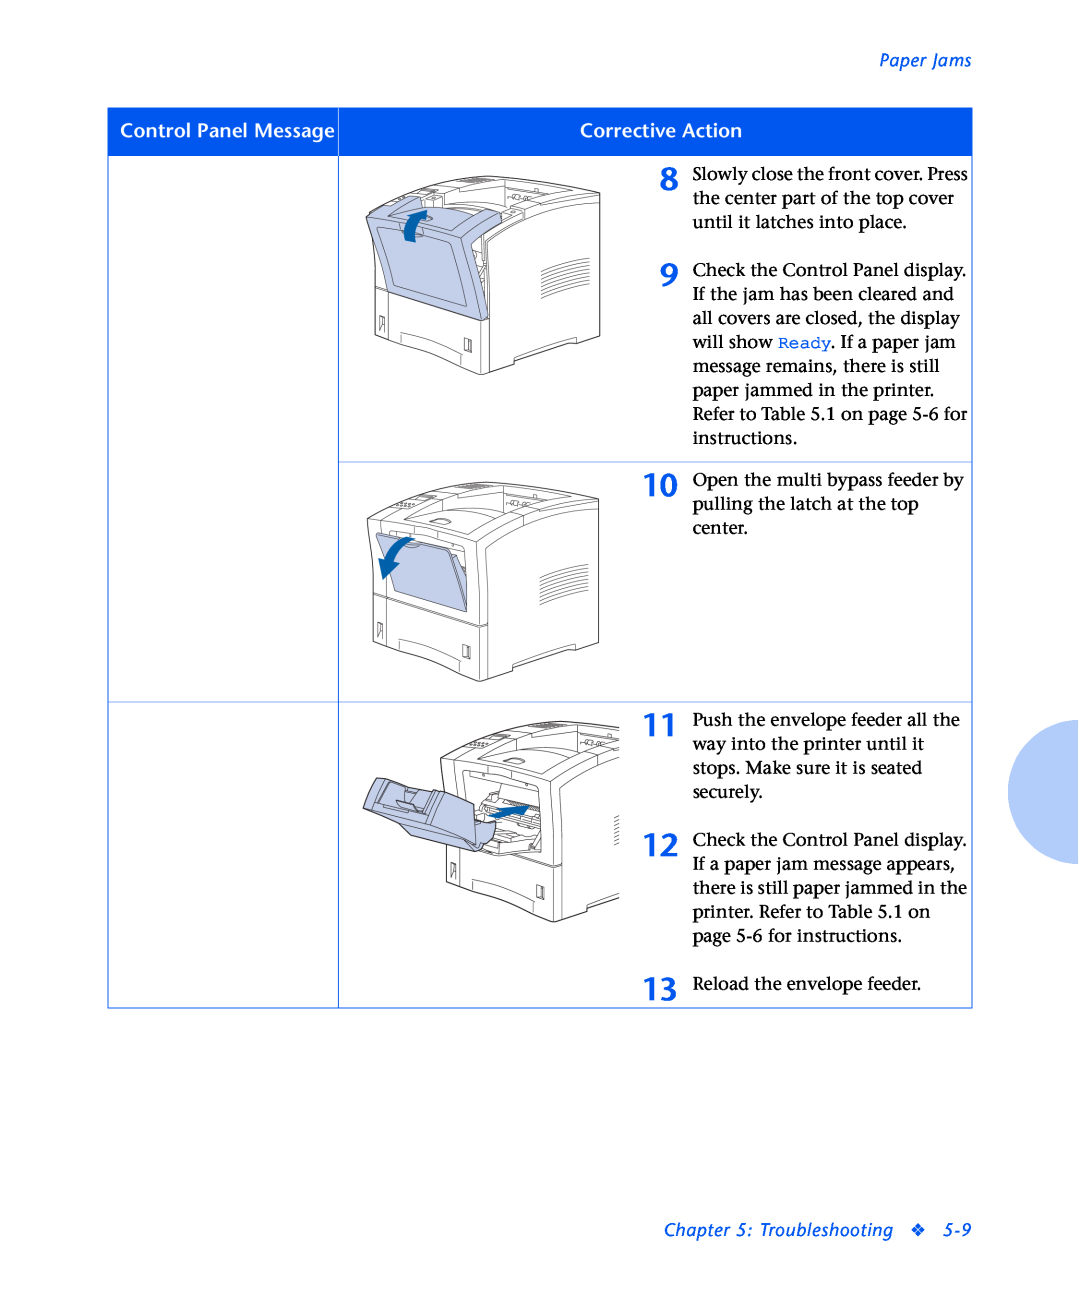 Xerox N2125 manual Paper Jams, Slowly close the front cover. Press, Troubleshooting 